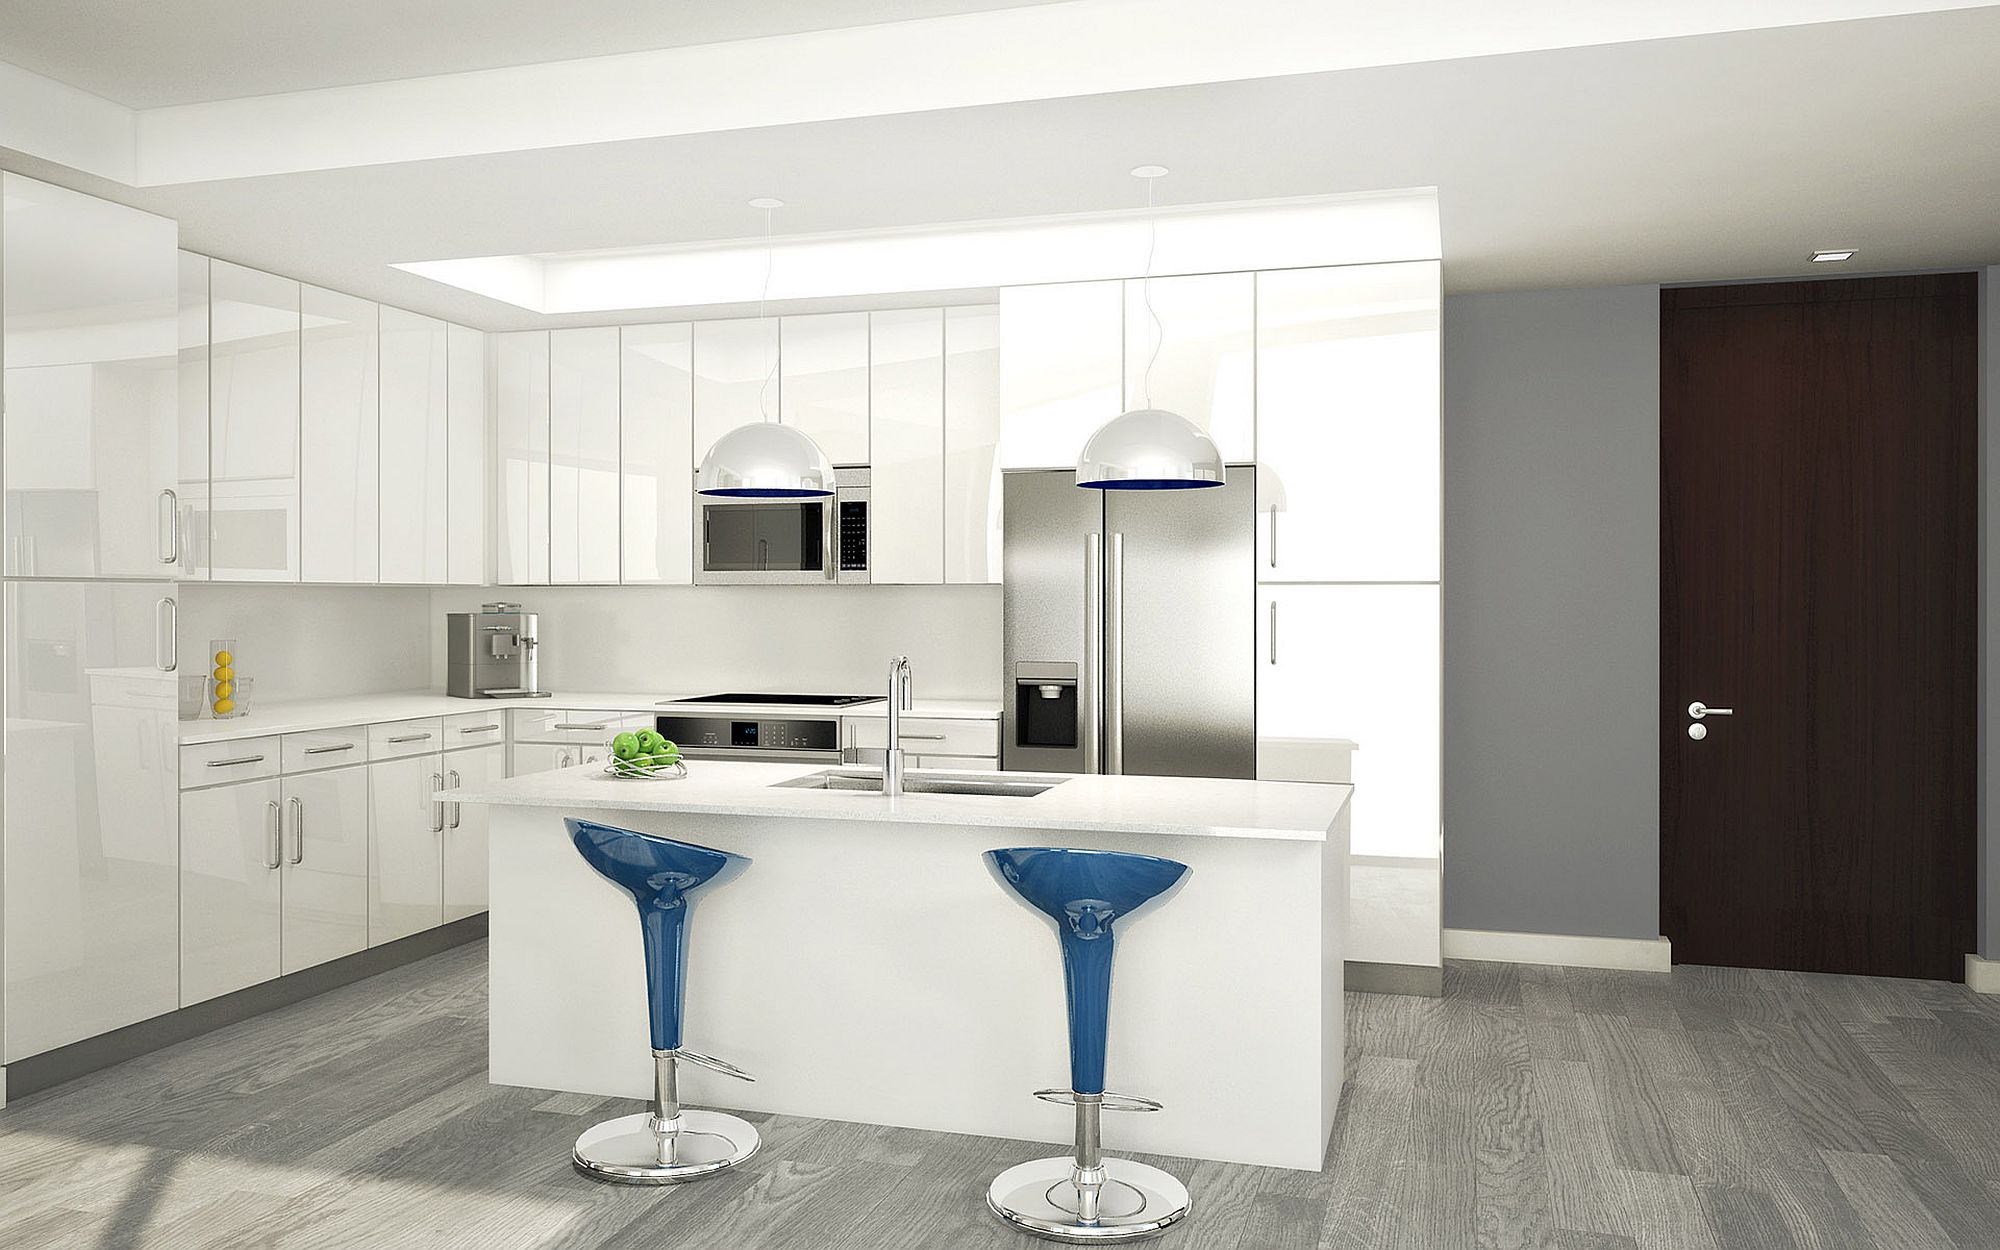 Bar stools bring a touch of blue to the kitchen